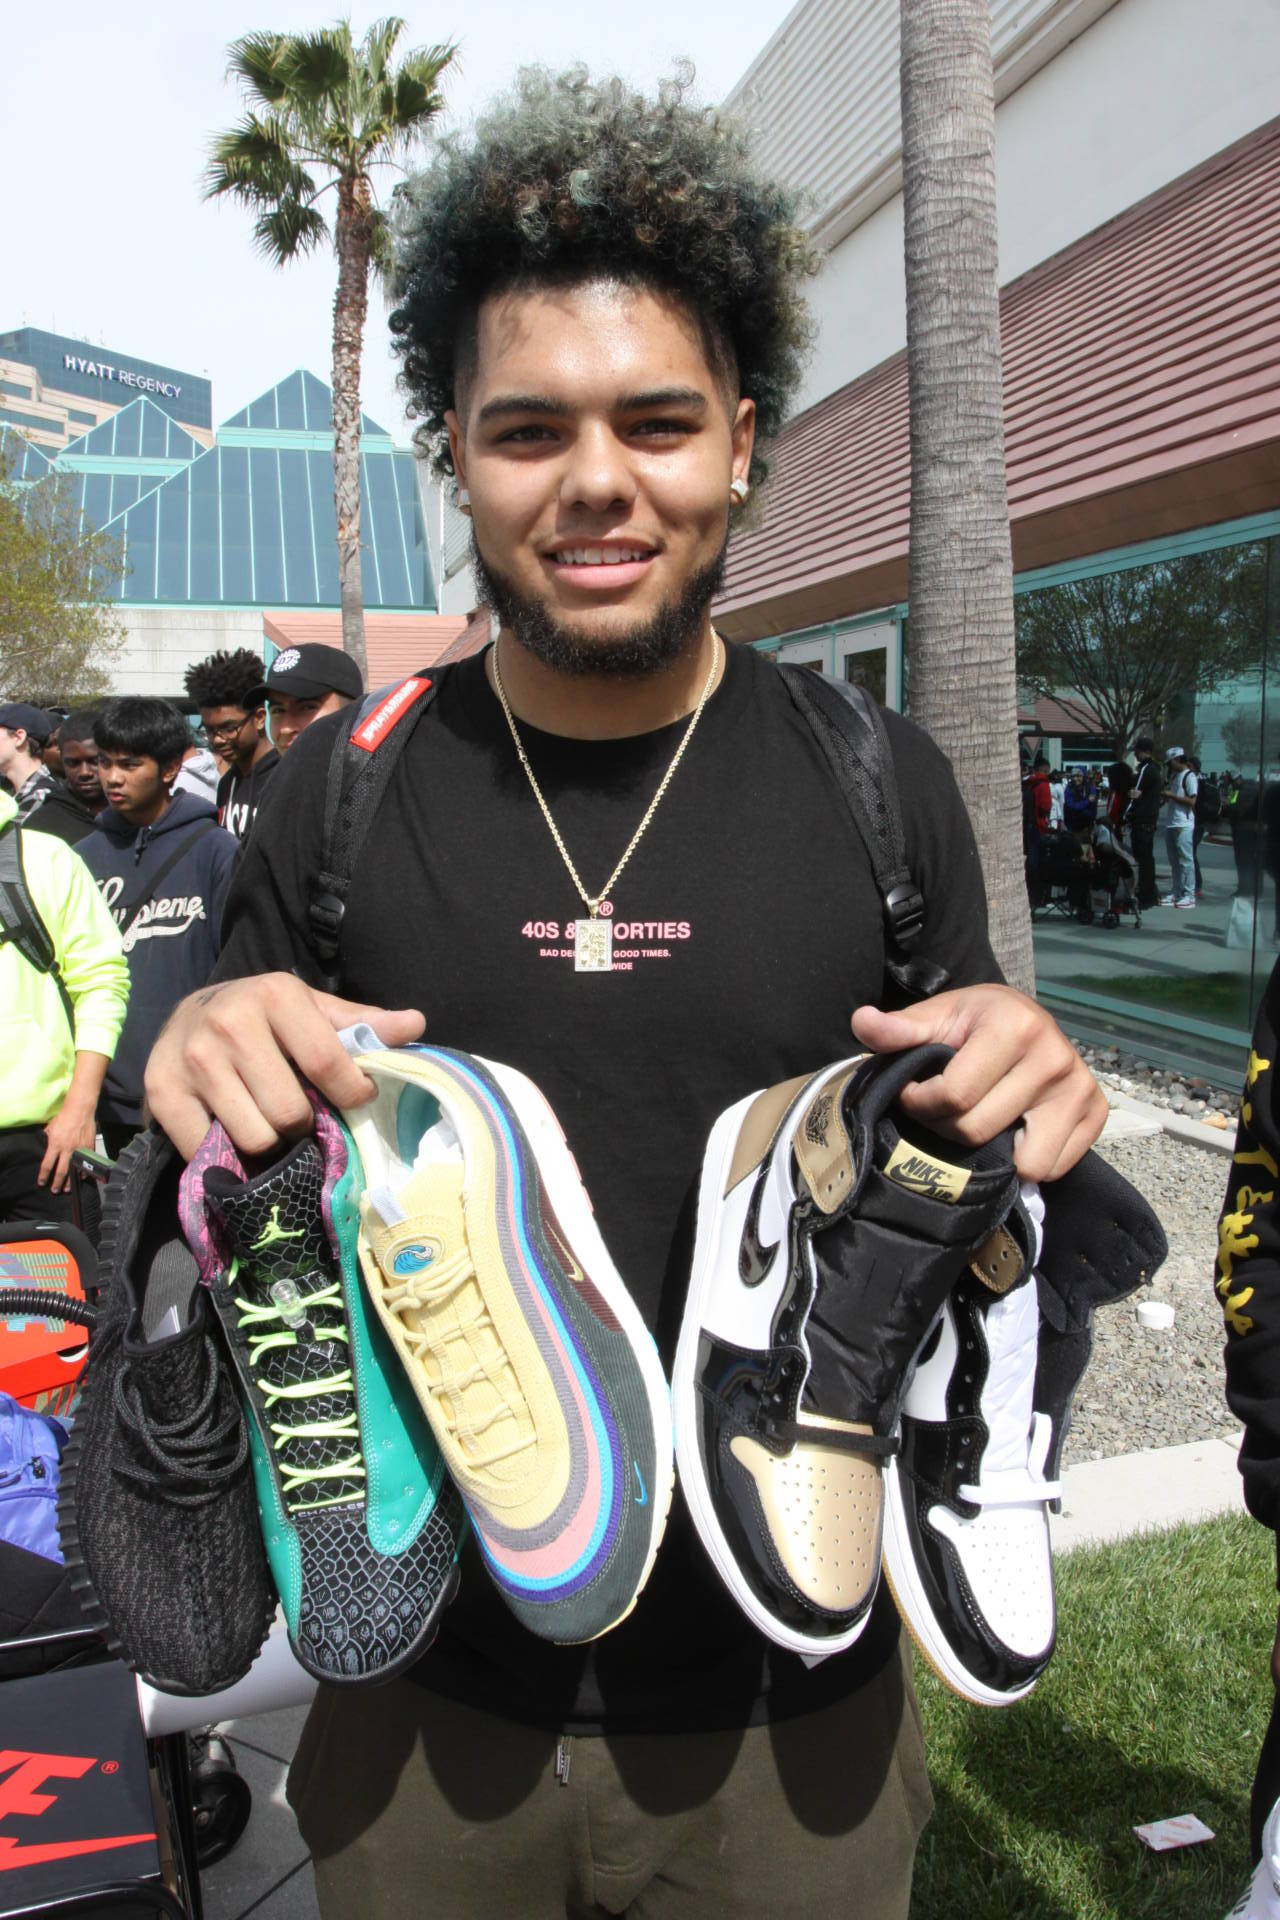 Eighteen-year old Frank Robinson drove 8 hours from Las Vegas, Nevada with 3 friends to attend Sneaker Con this weekend. They got in line before 4 am and started selling shoes outside even before doors opened at noon on Saturday.